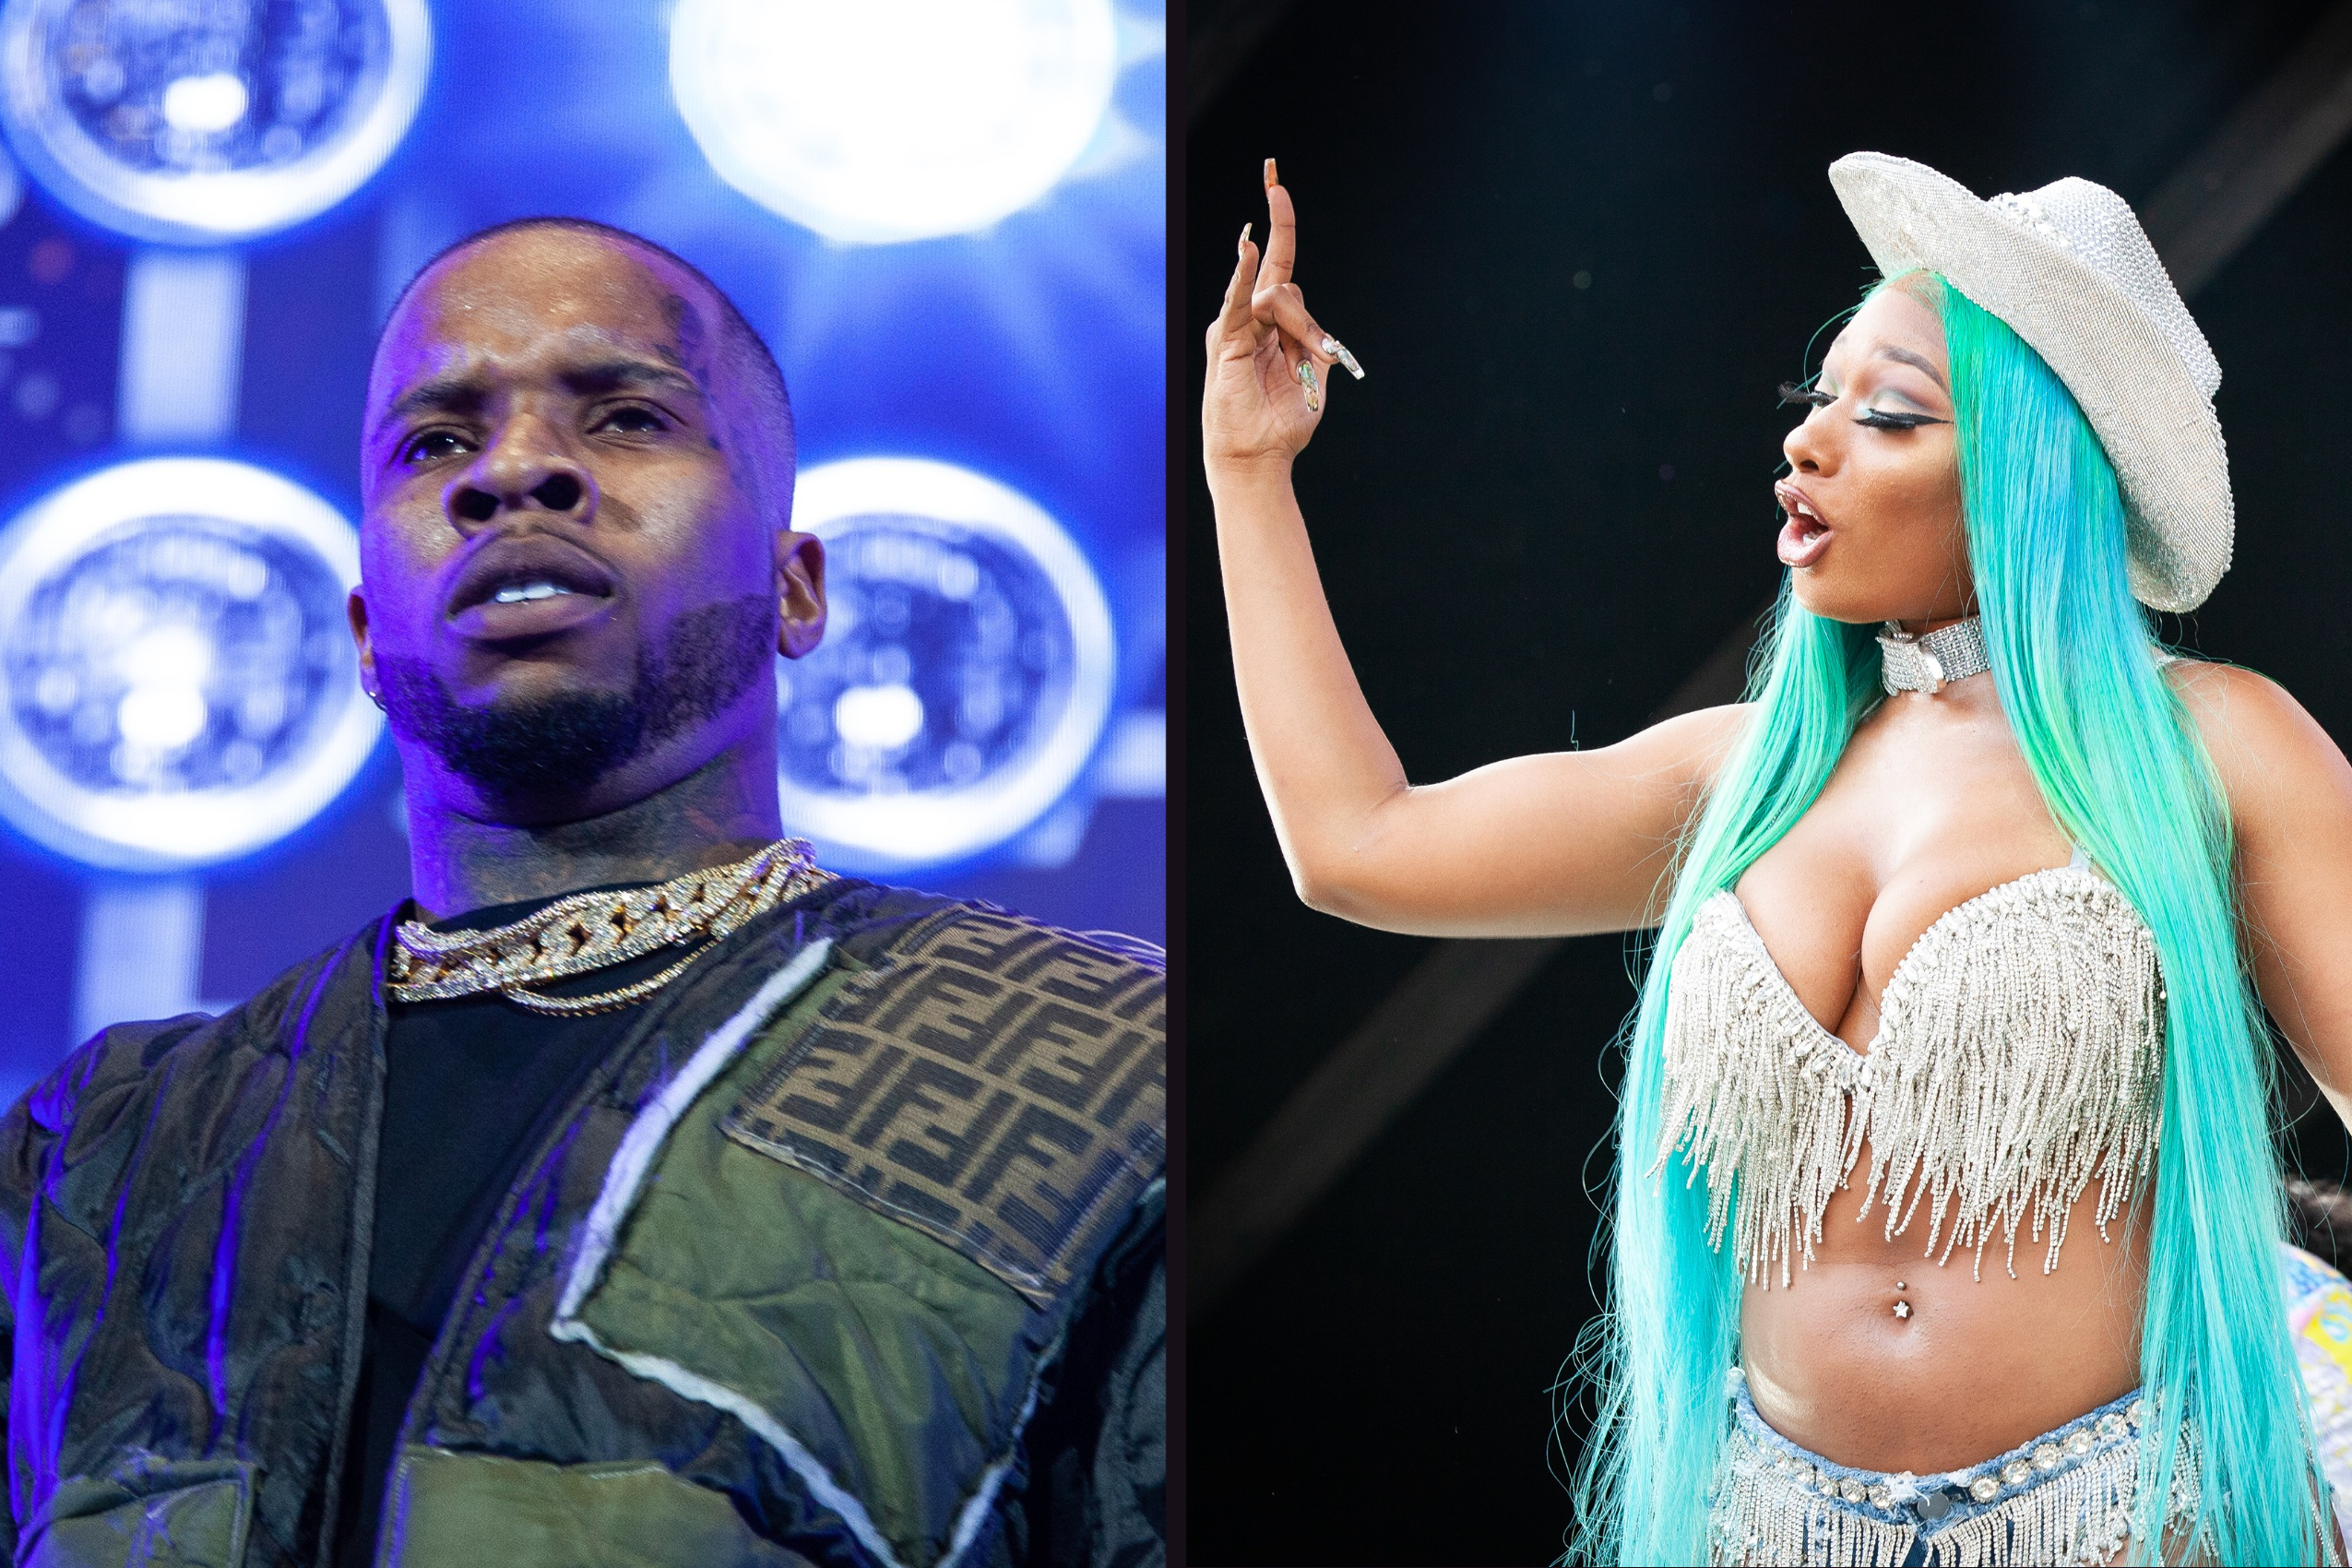 Tory Lanez Yelled “Dance, B*tch” Before Shooting at Megan Thee Stallion, Per Detective